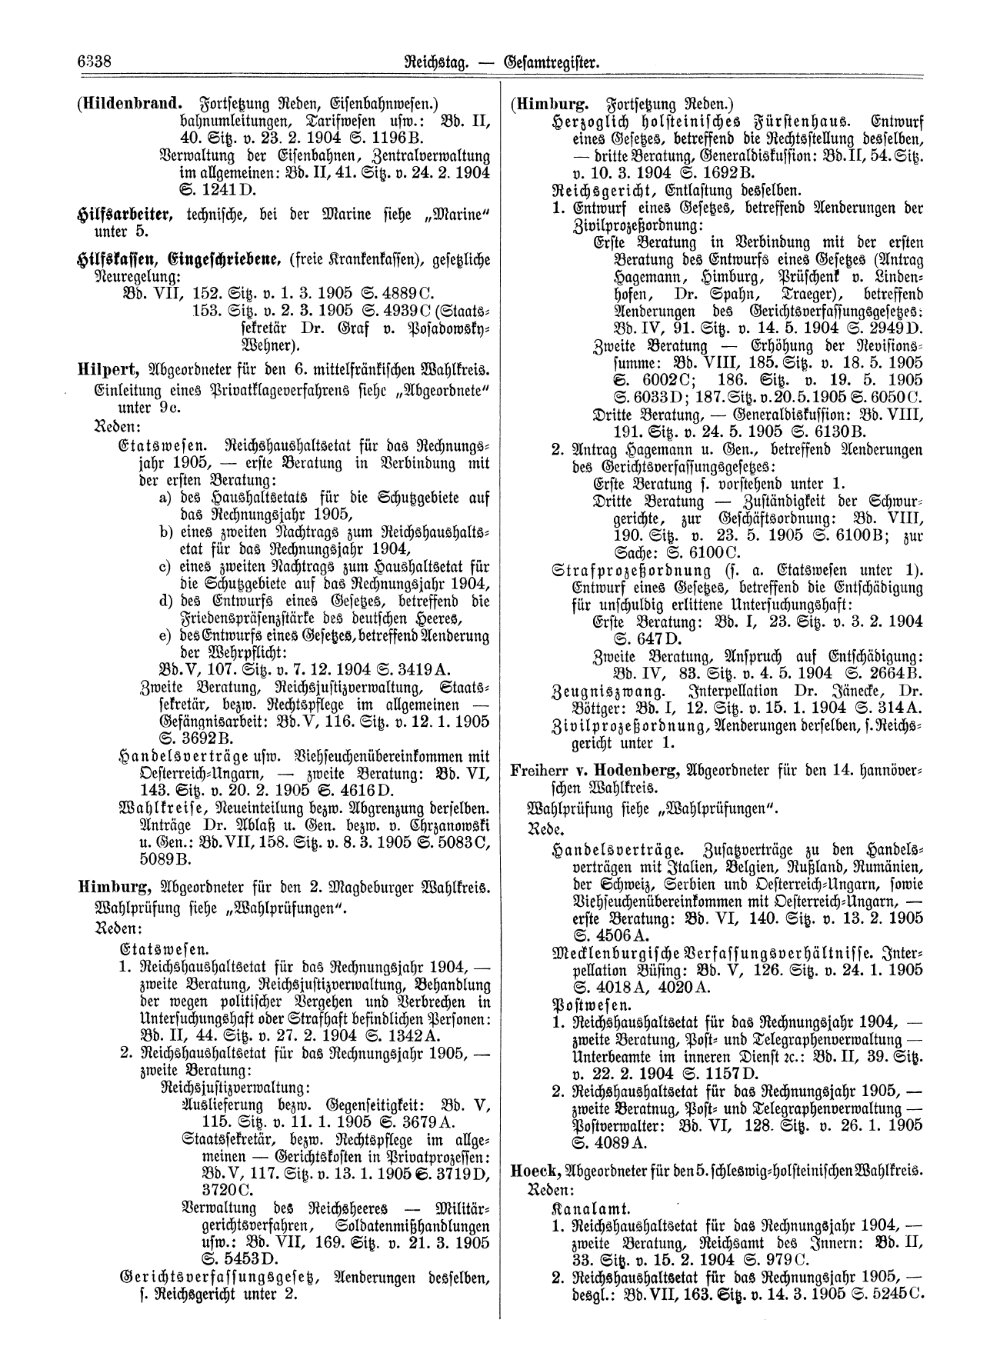 Scan of page 6338